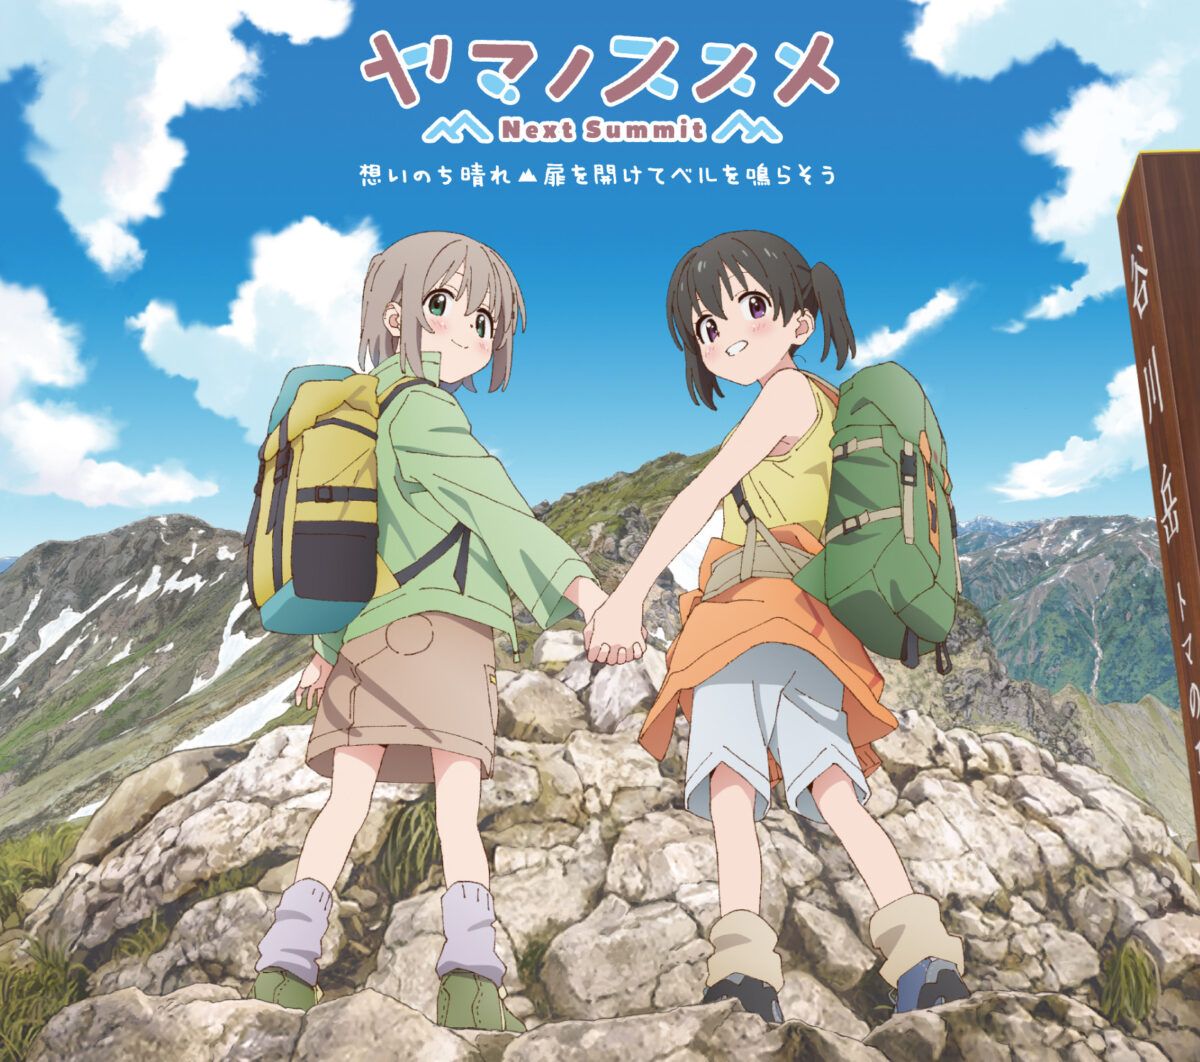 Encouragement of Climb: Next Summit' Hikes It Way To HiDive